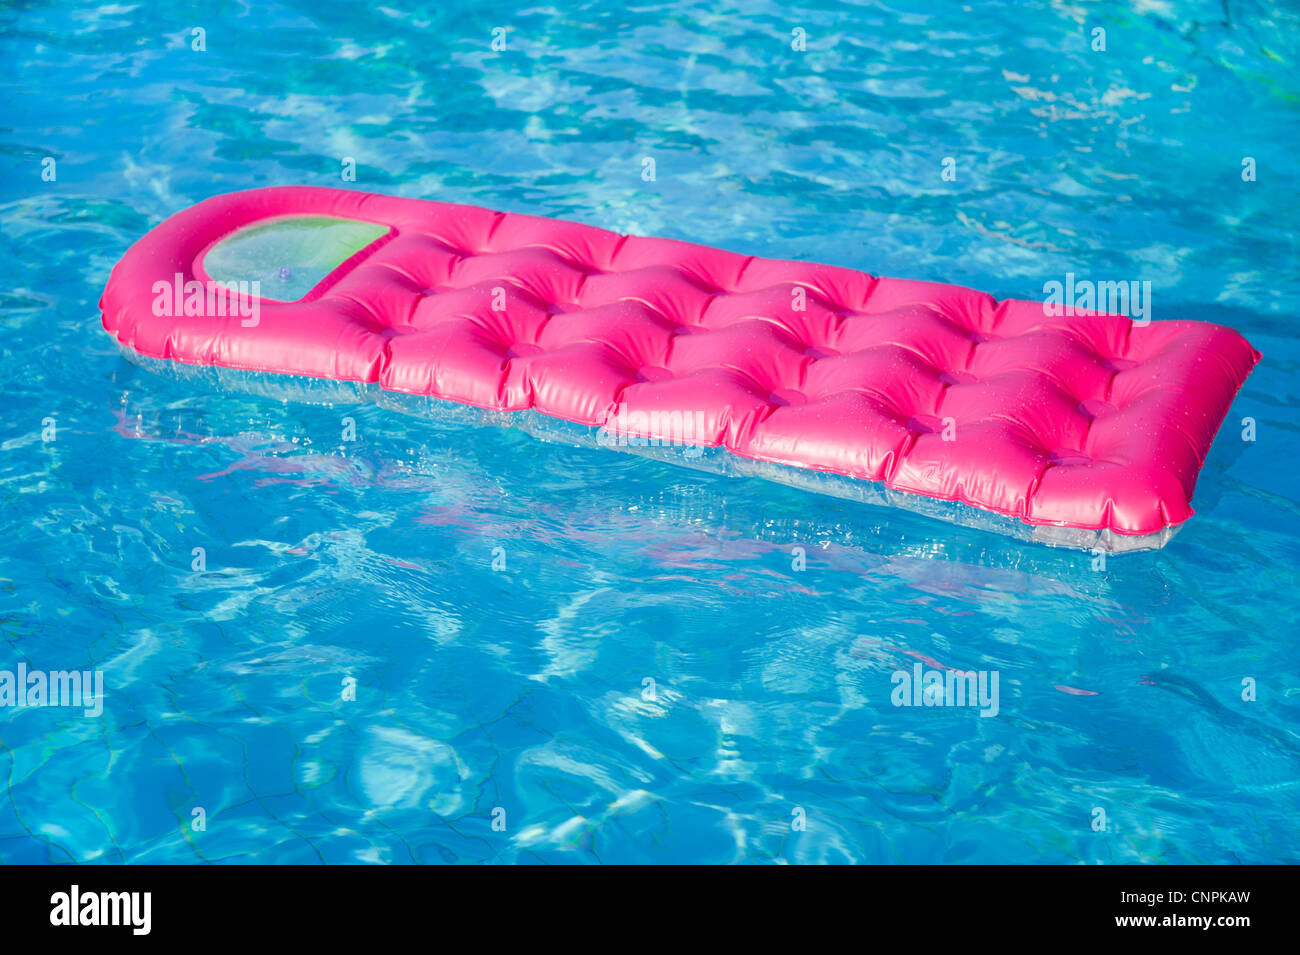 Floating pink and green air mattress in swimming pool Stock Photo - Alamy